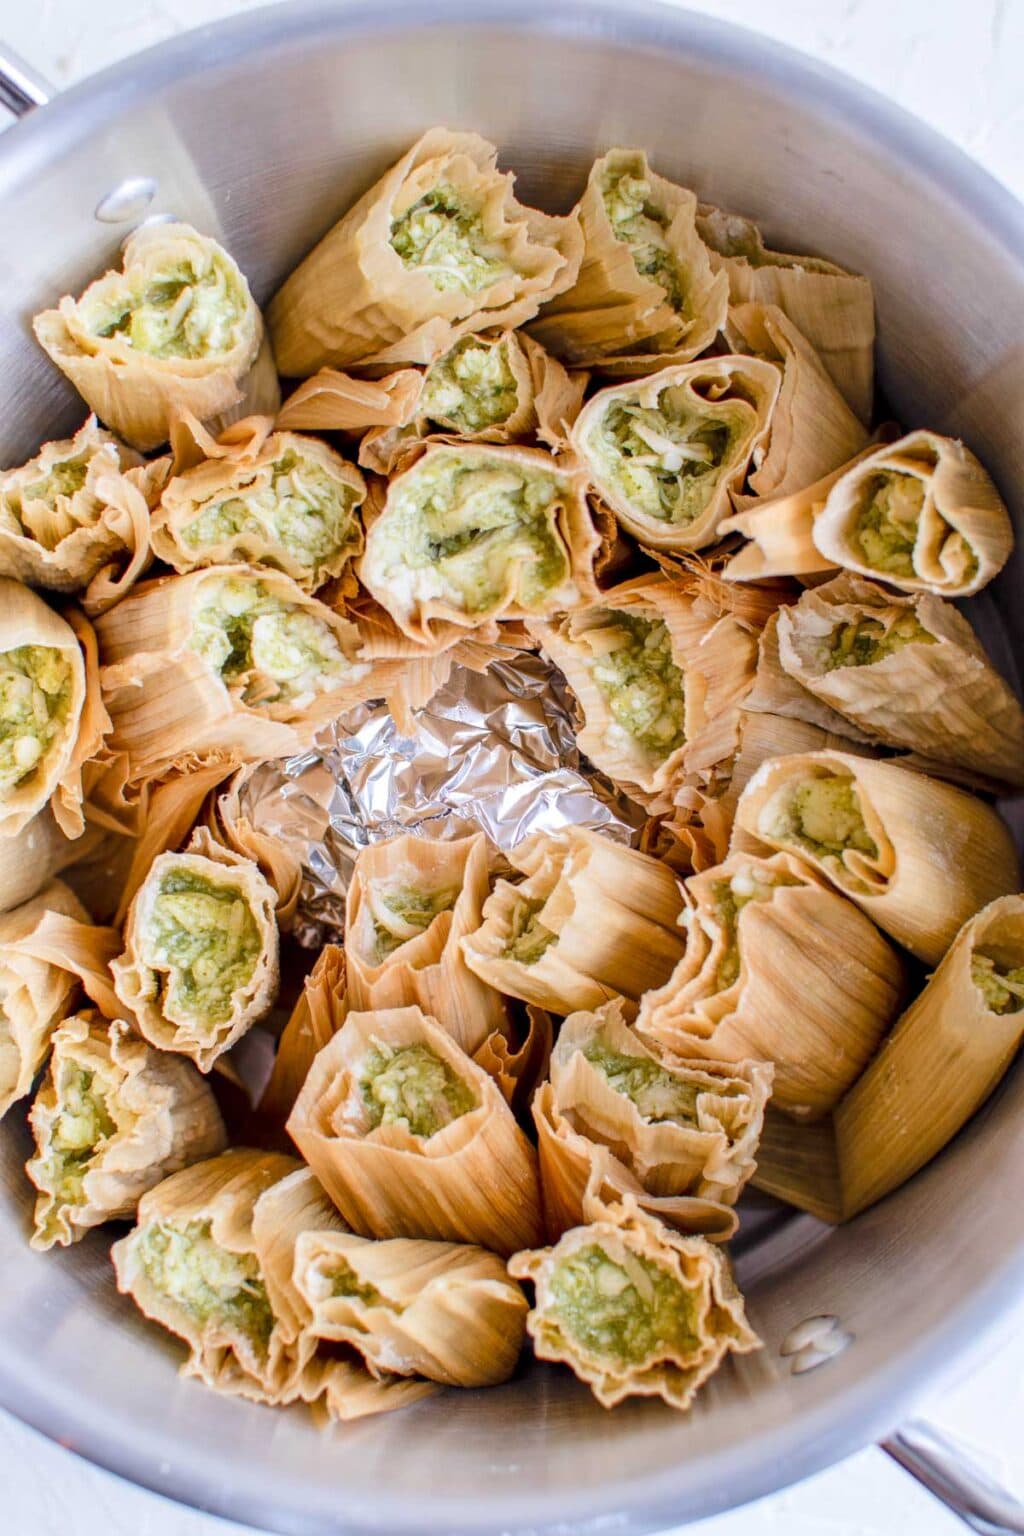 How to Make Tamales (Green Chile Chicken Tamales) | YellowBlissRoad.com